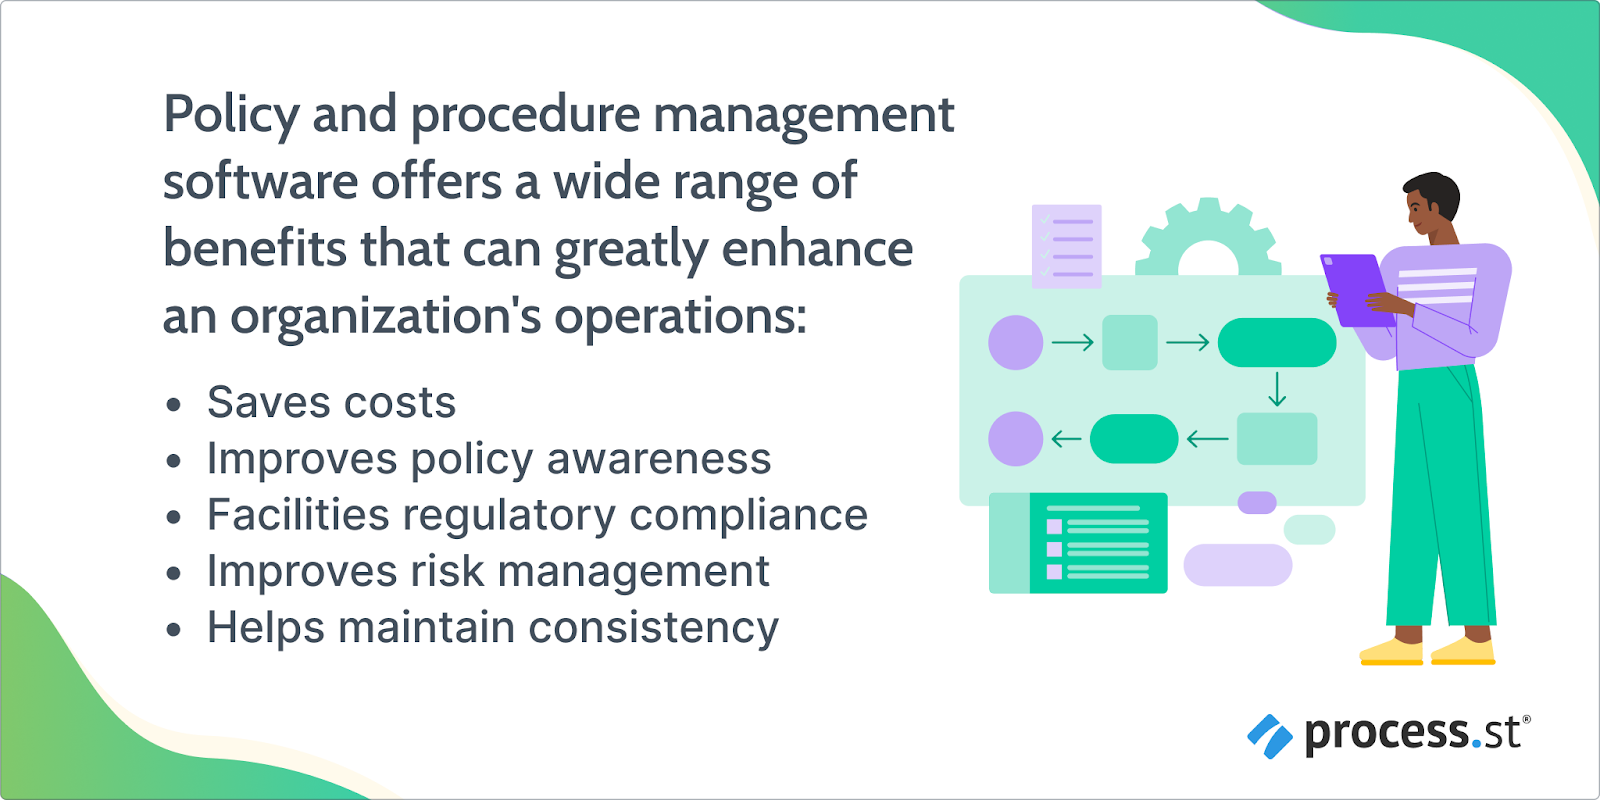 image showing the benefits of policy and procedure management software